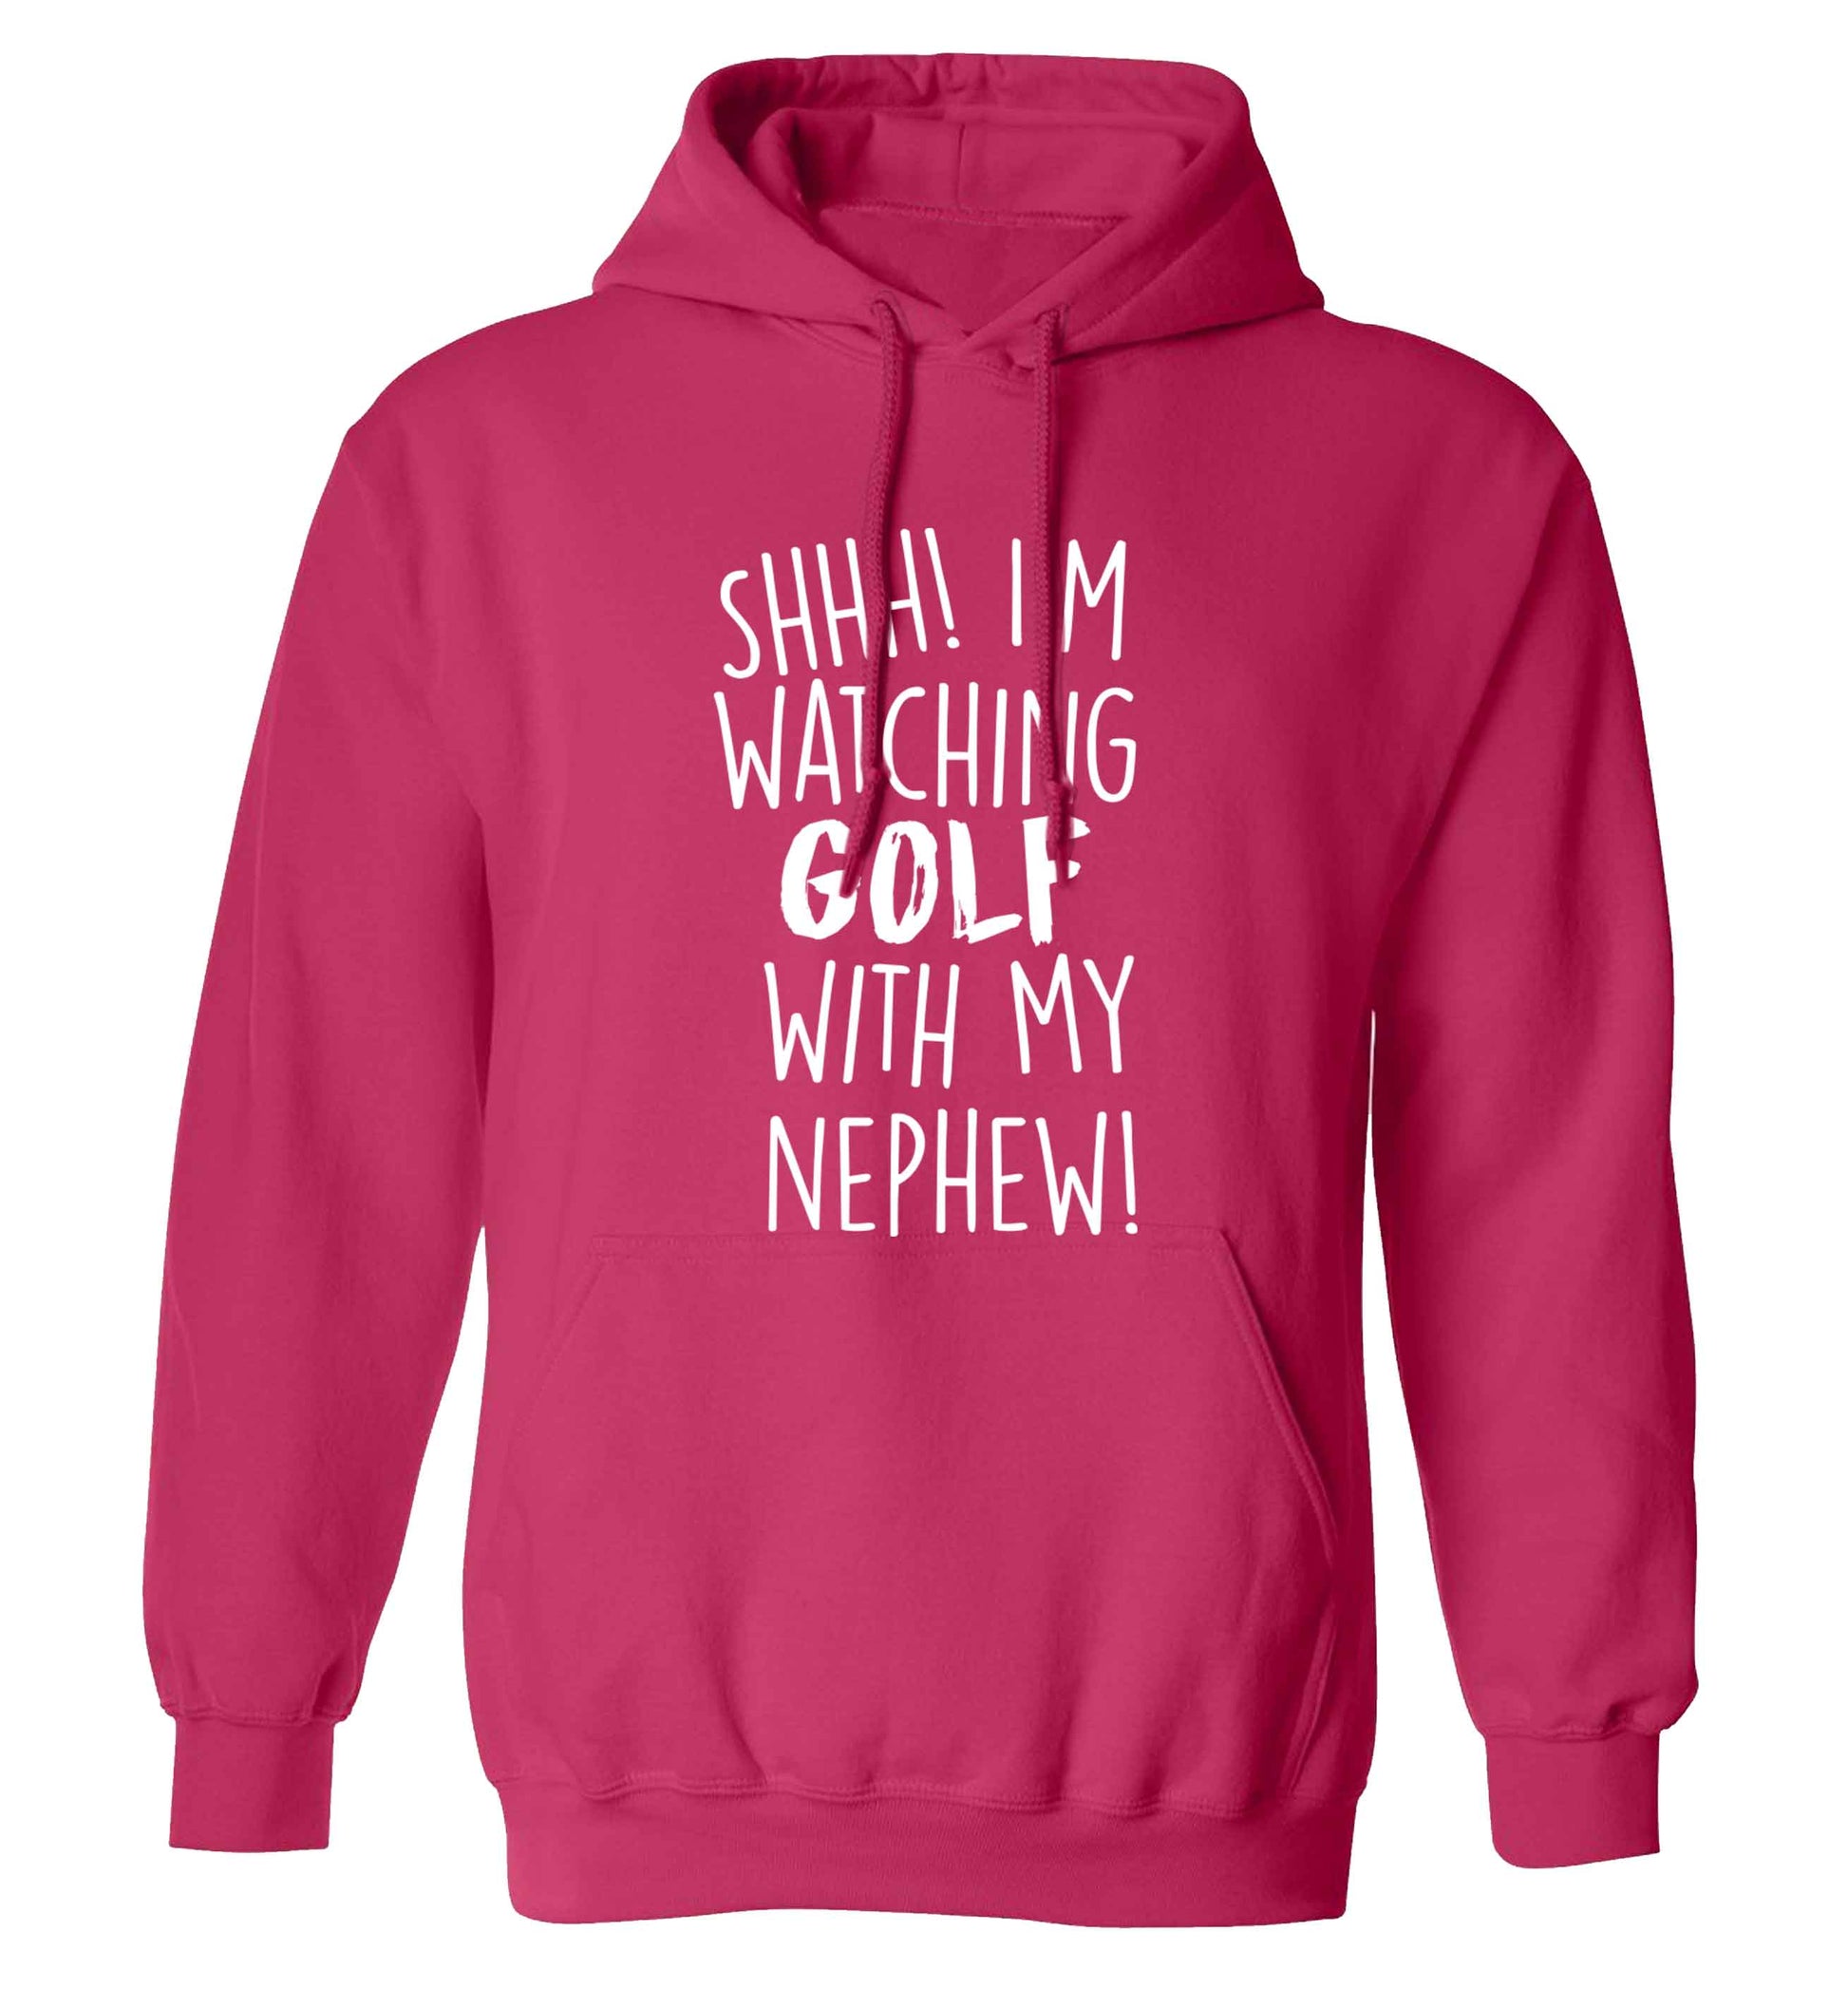 Shh I'm watching golf with my nephew adults unisex pink hoodie 2XL